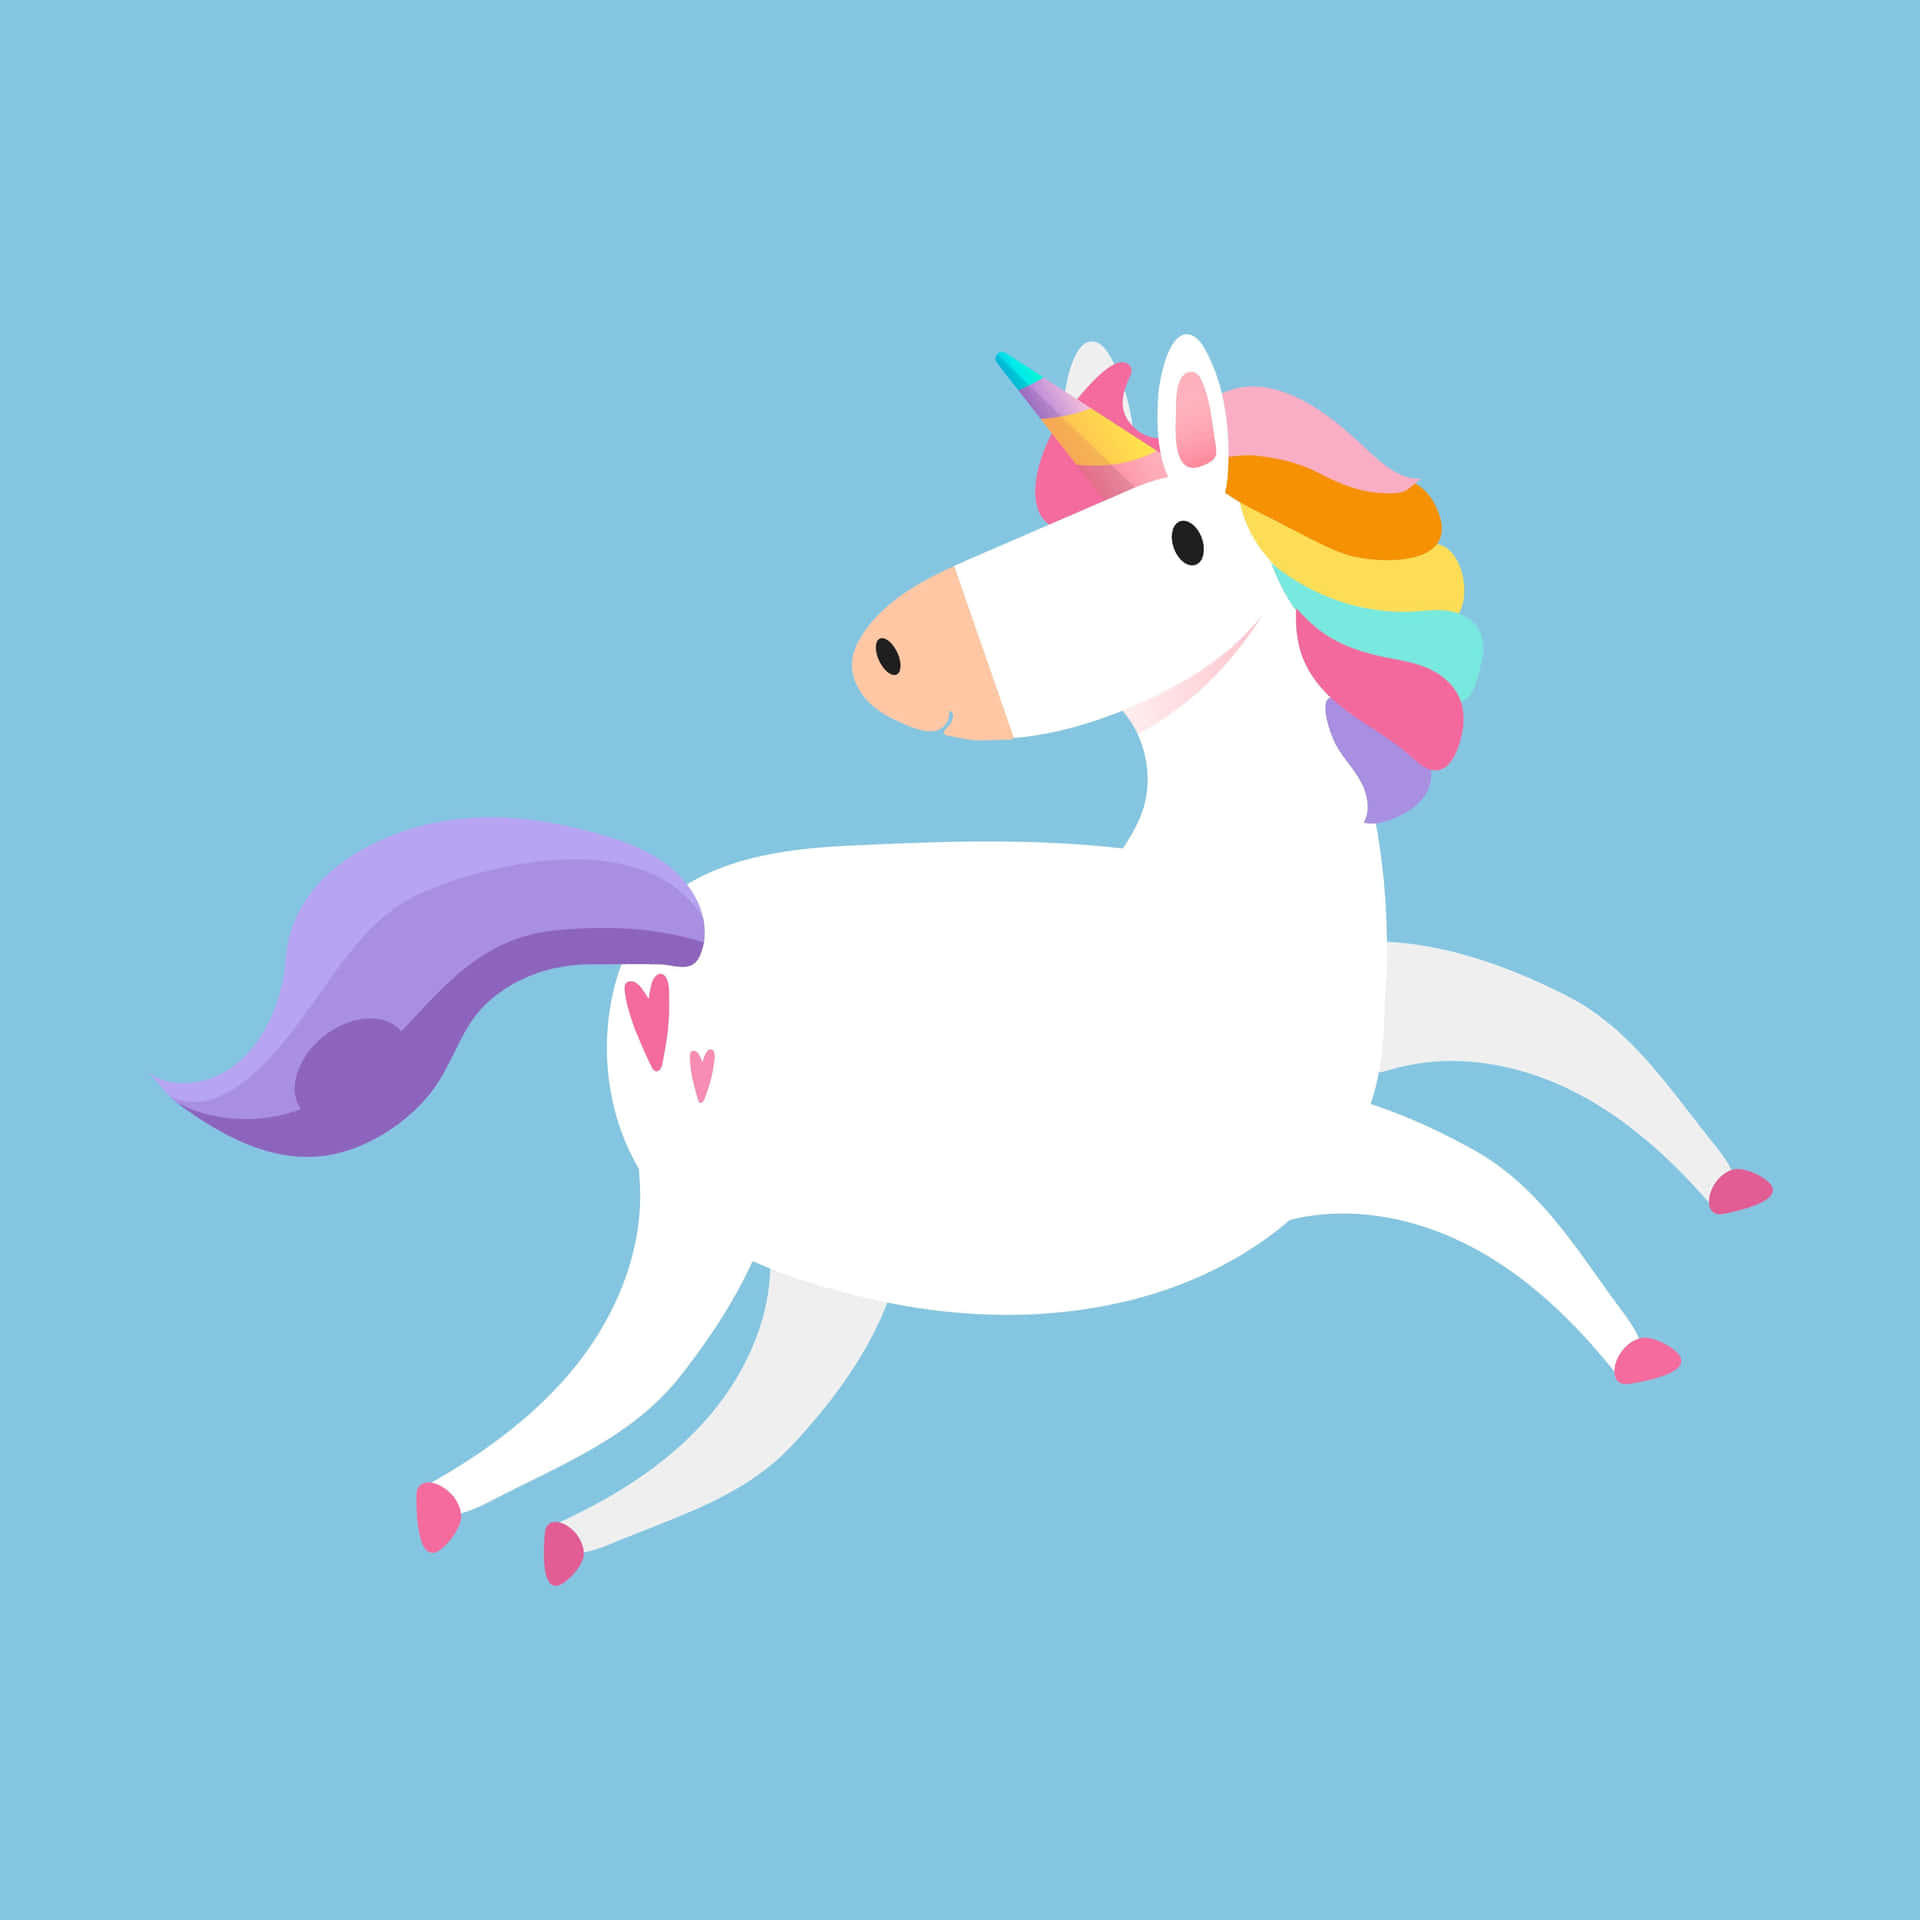 Let your imagination soar with this majestic Rainbow Unicorn